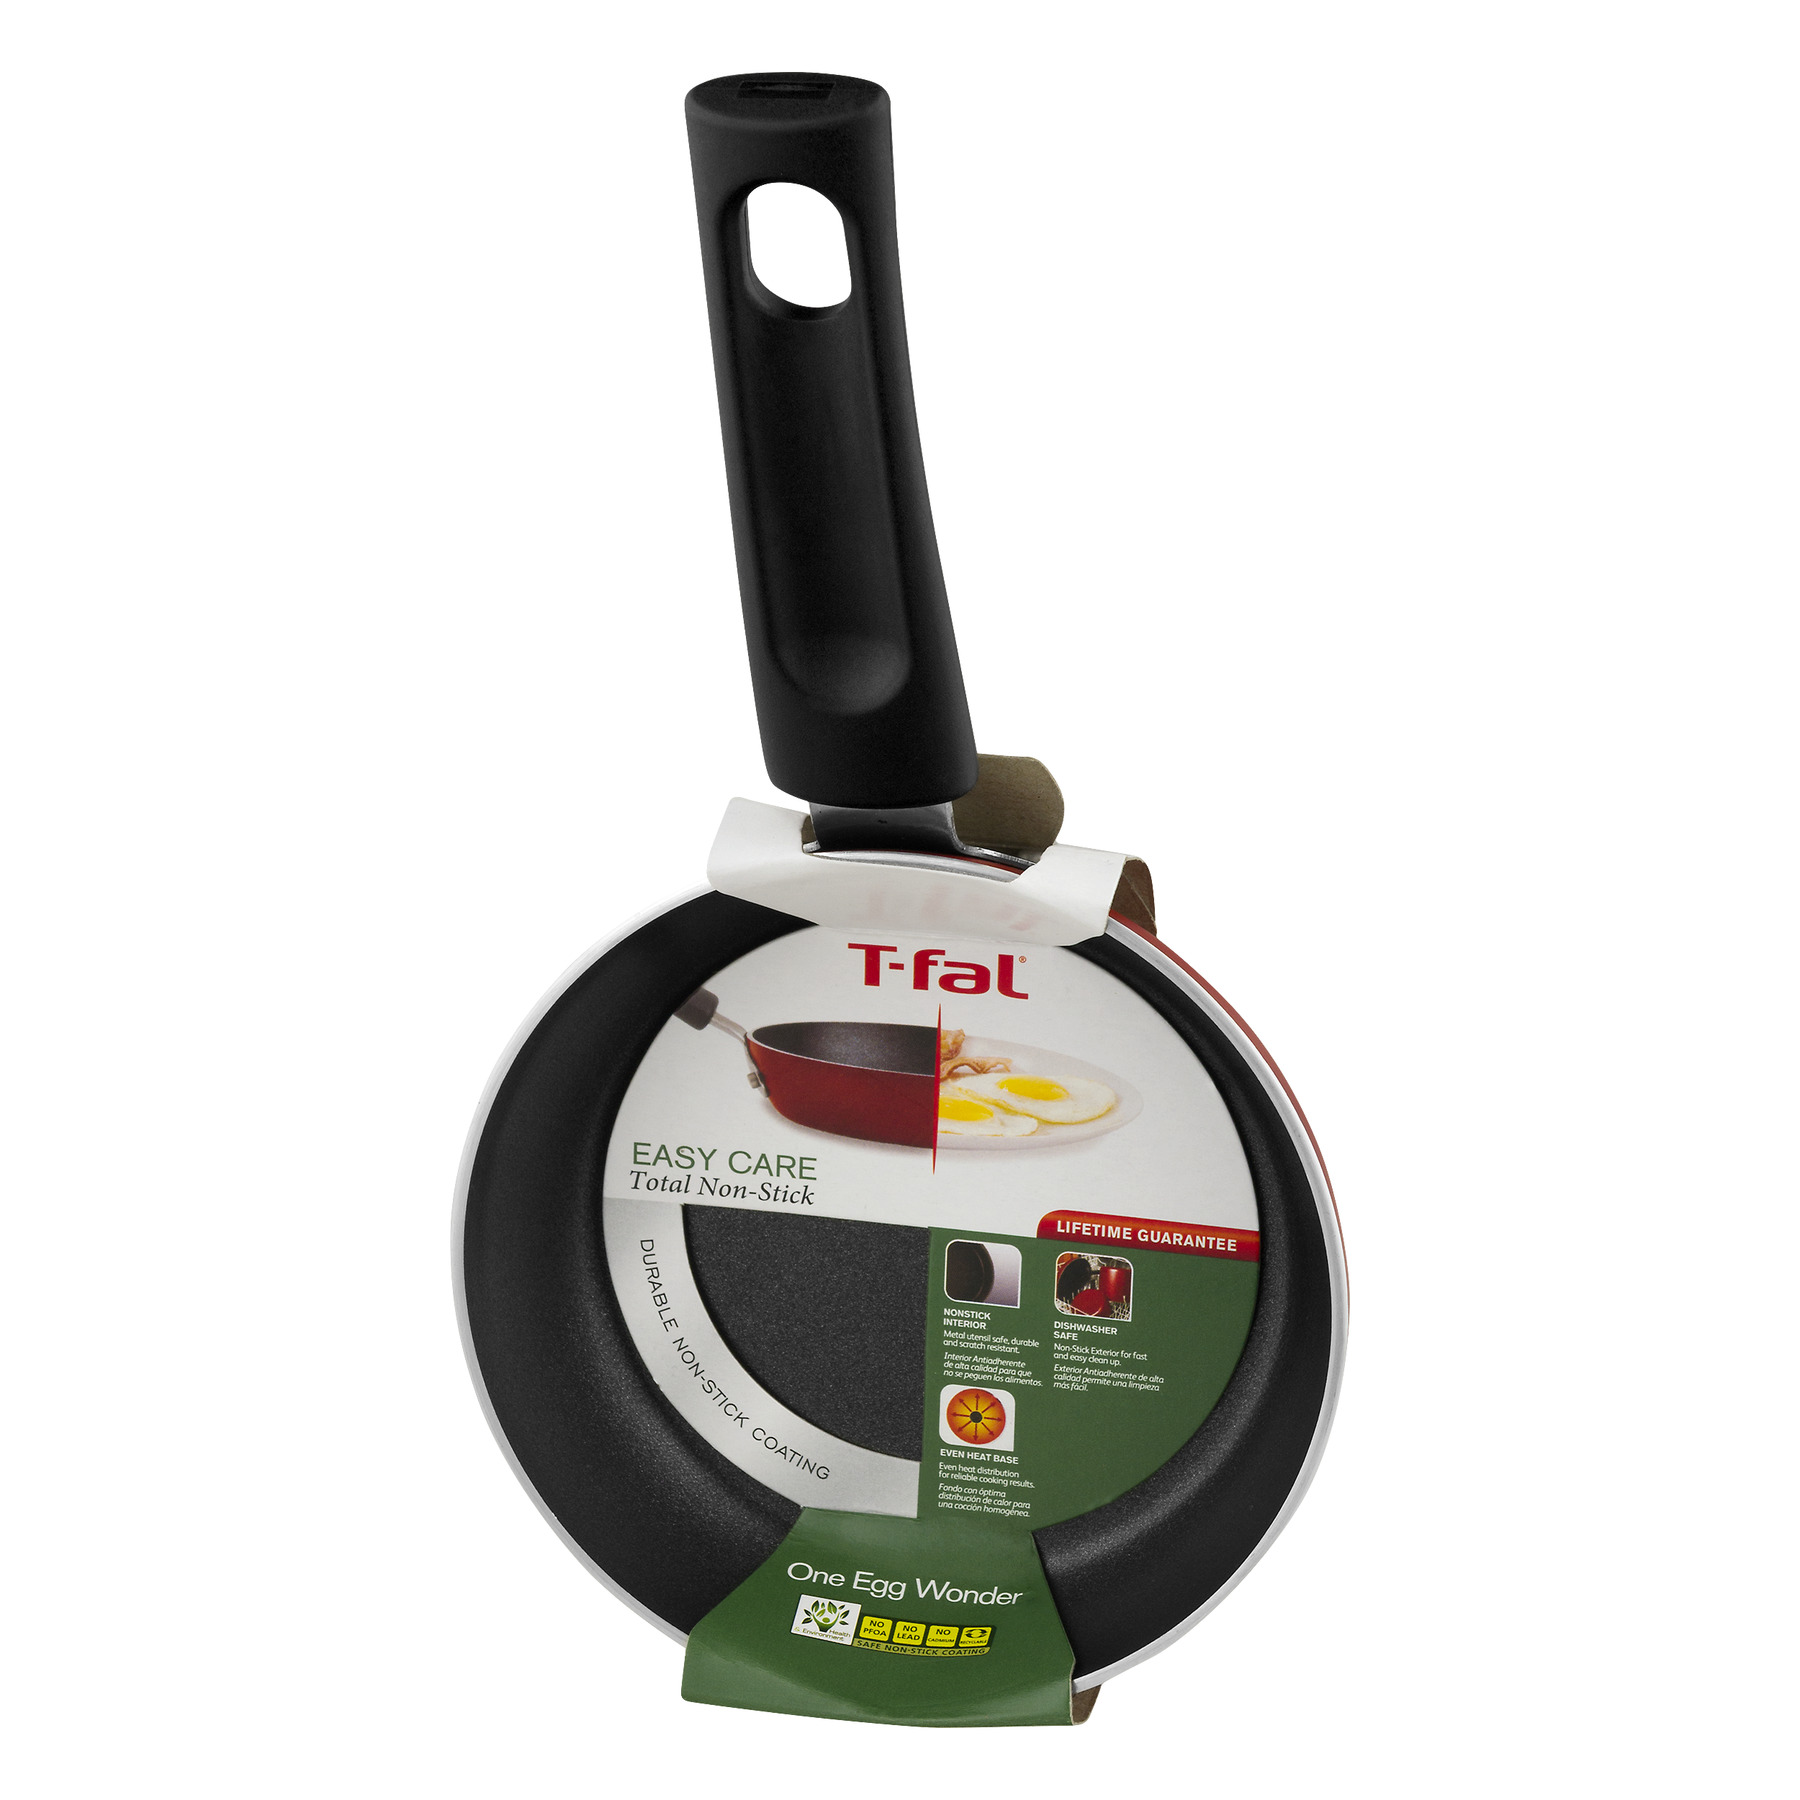 T-fal, Specialty Nonstick, One Egg Wonder 4.5 In. Fry Pan, Red - image 2 of 7